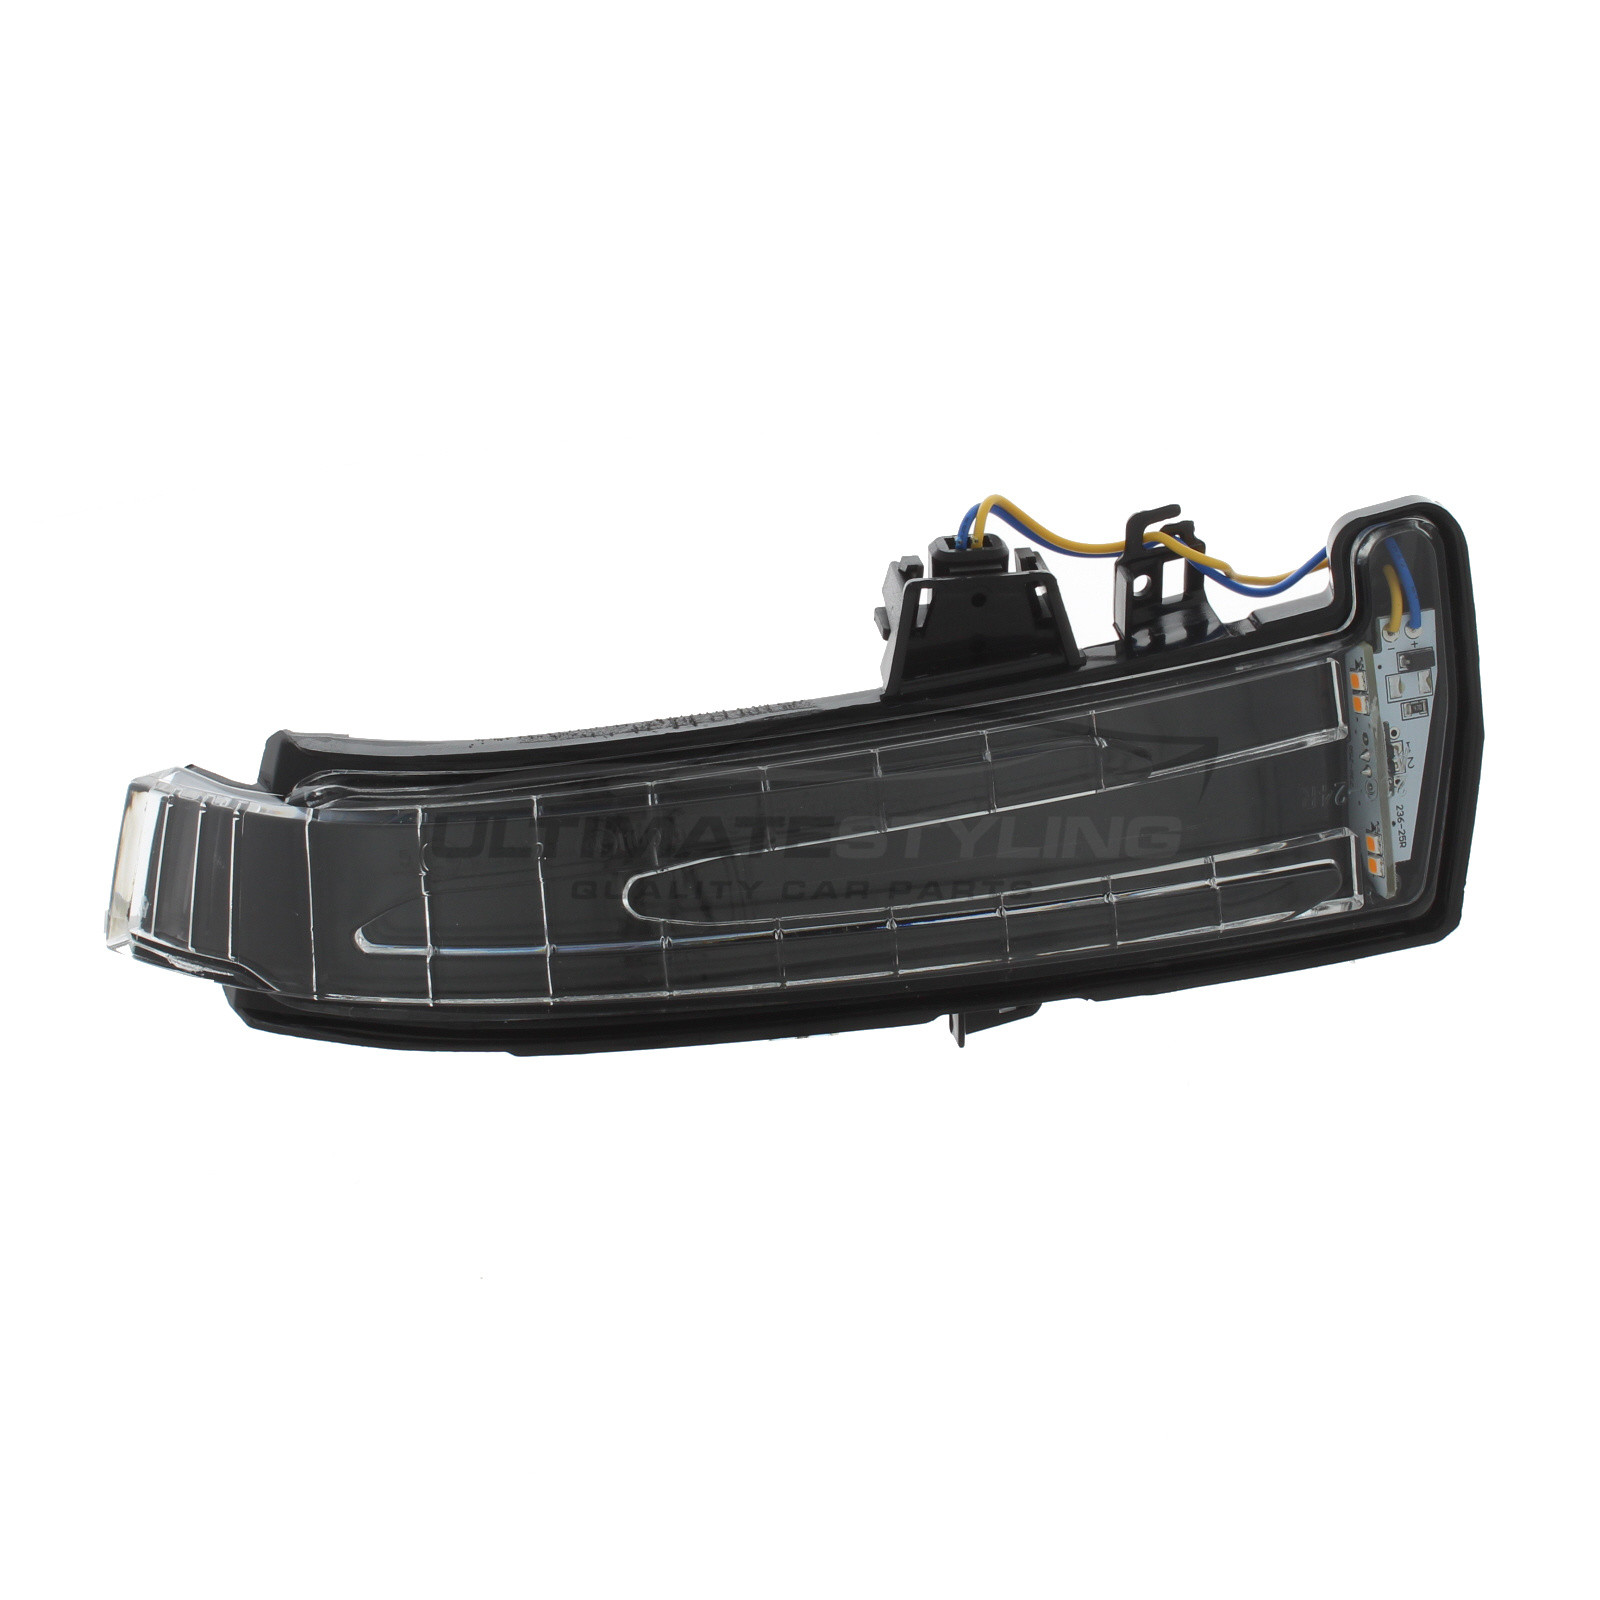 Mirror Indicator for Mercedes Benz GLA Class